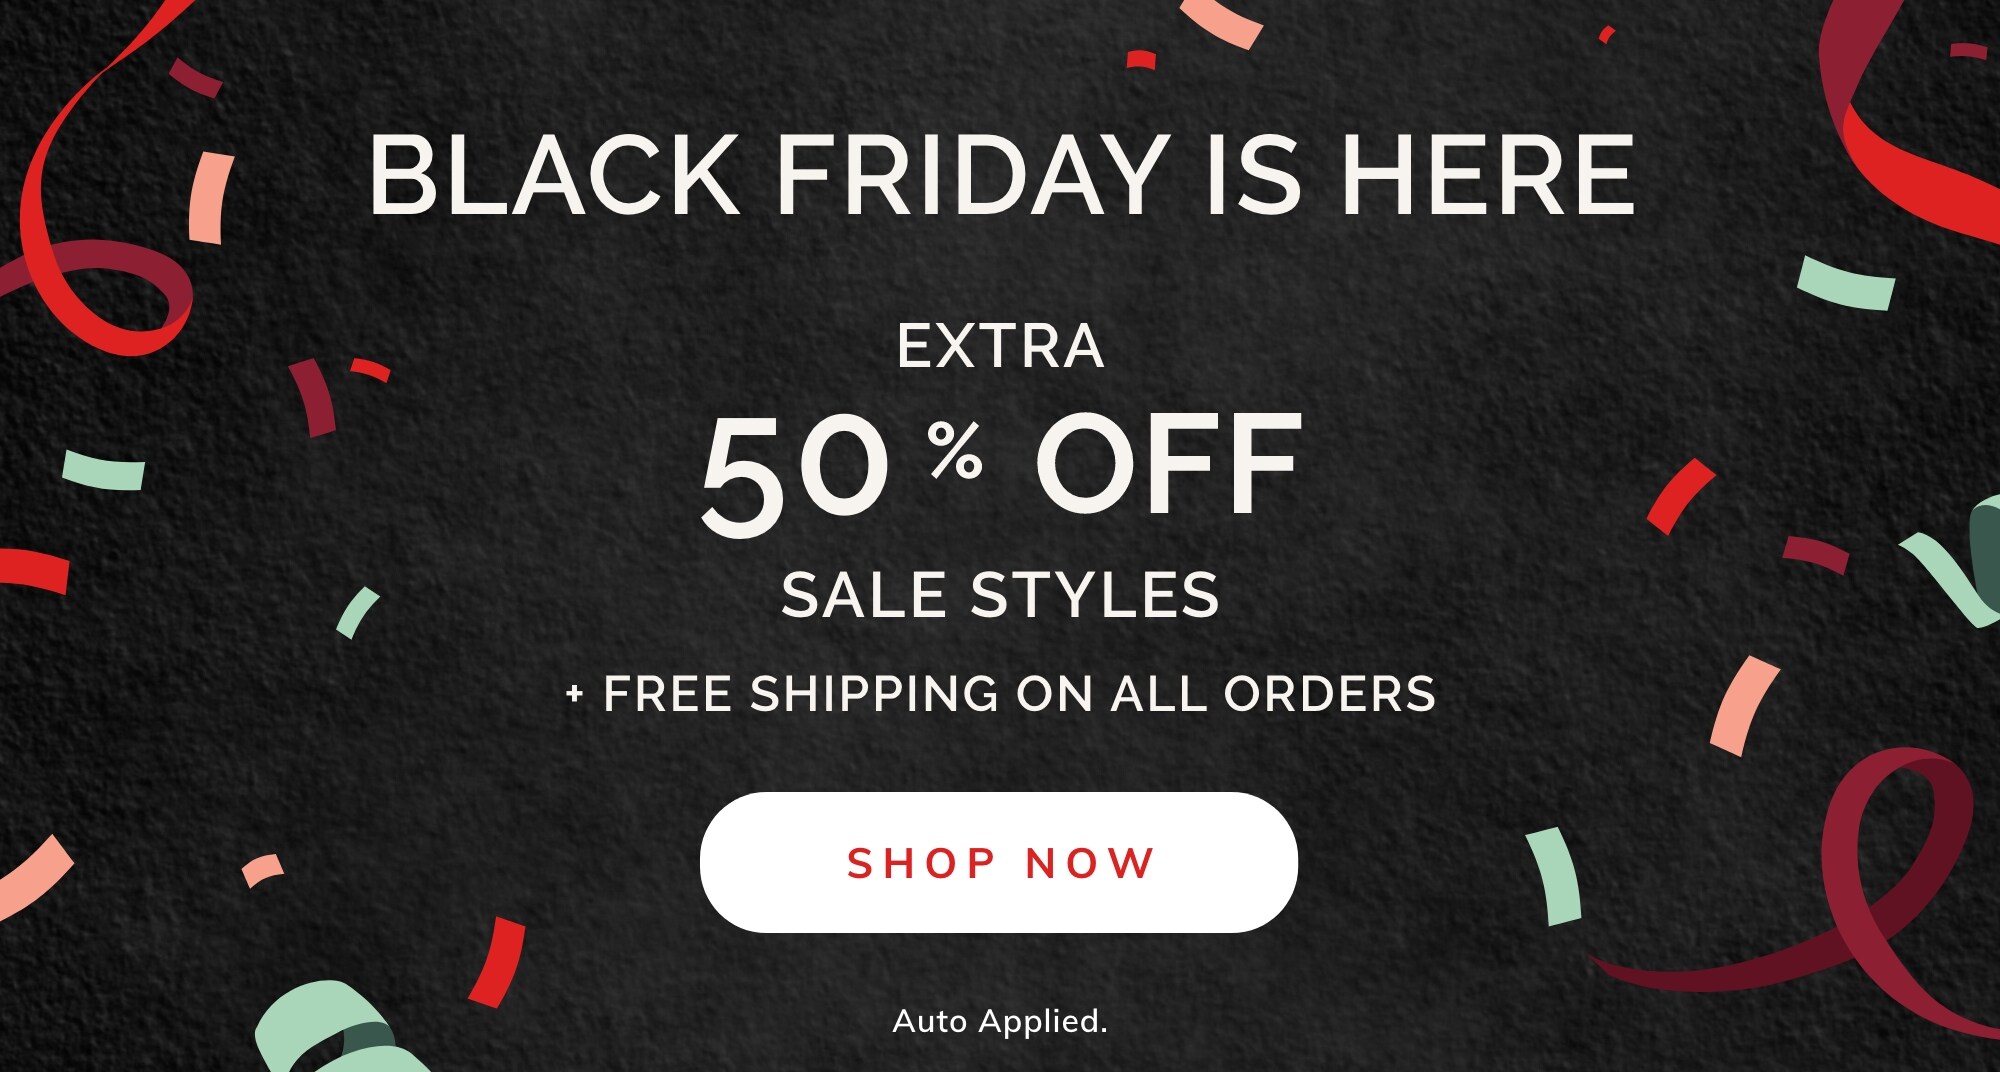 EXTRA 50% OFF SALE STYLES* 